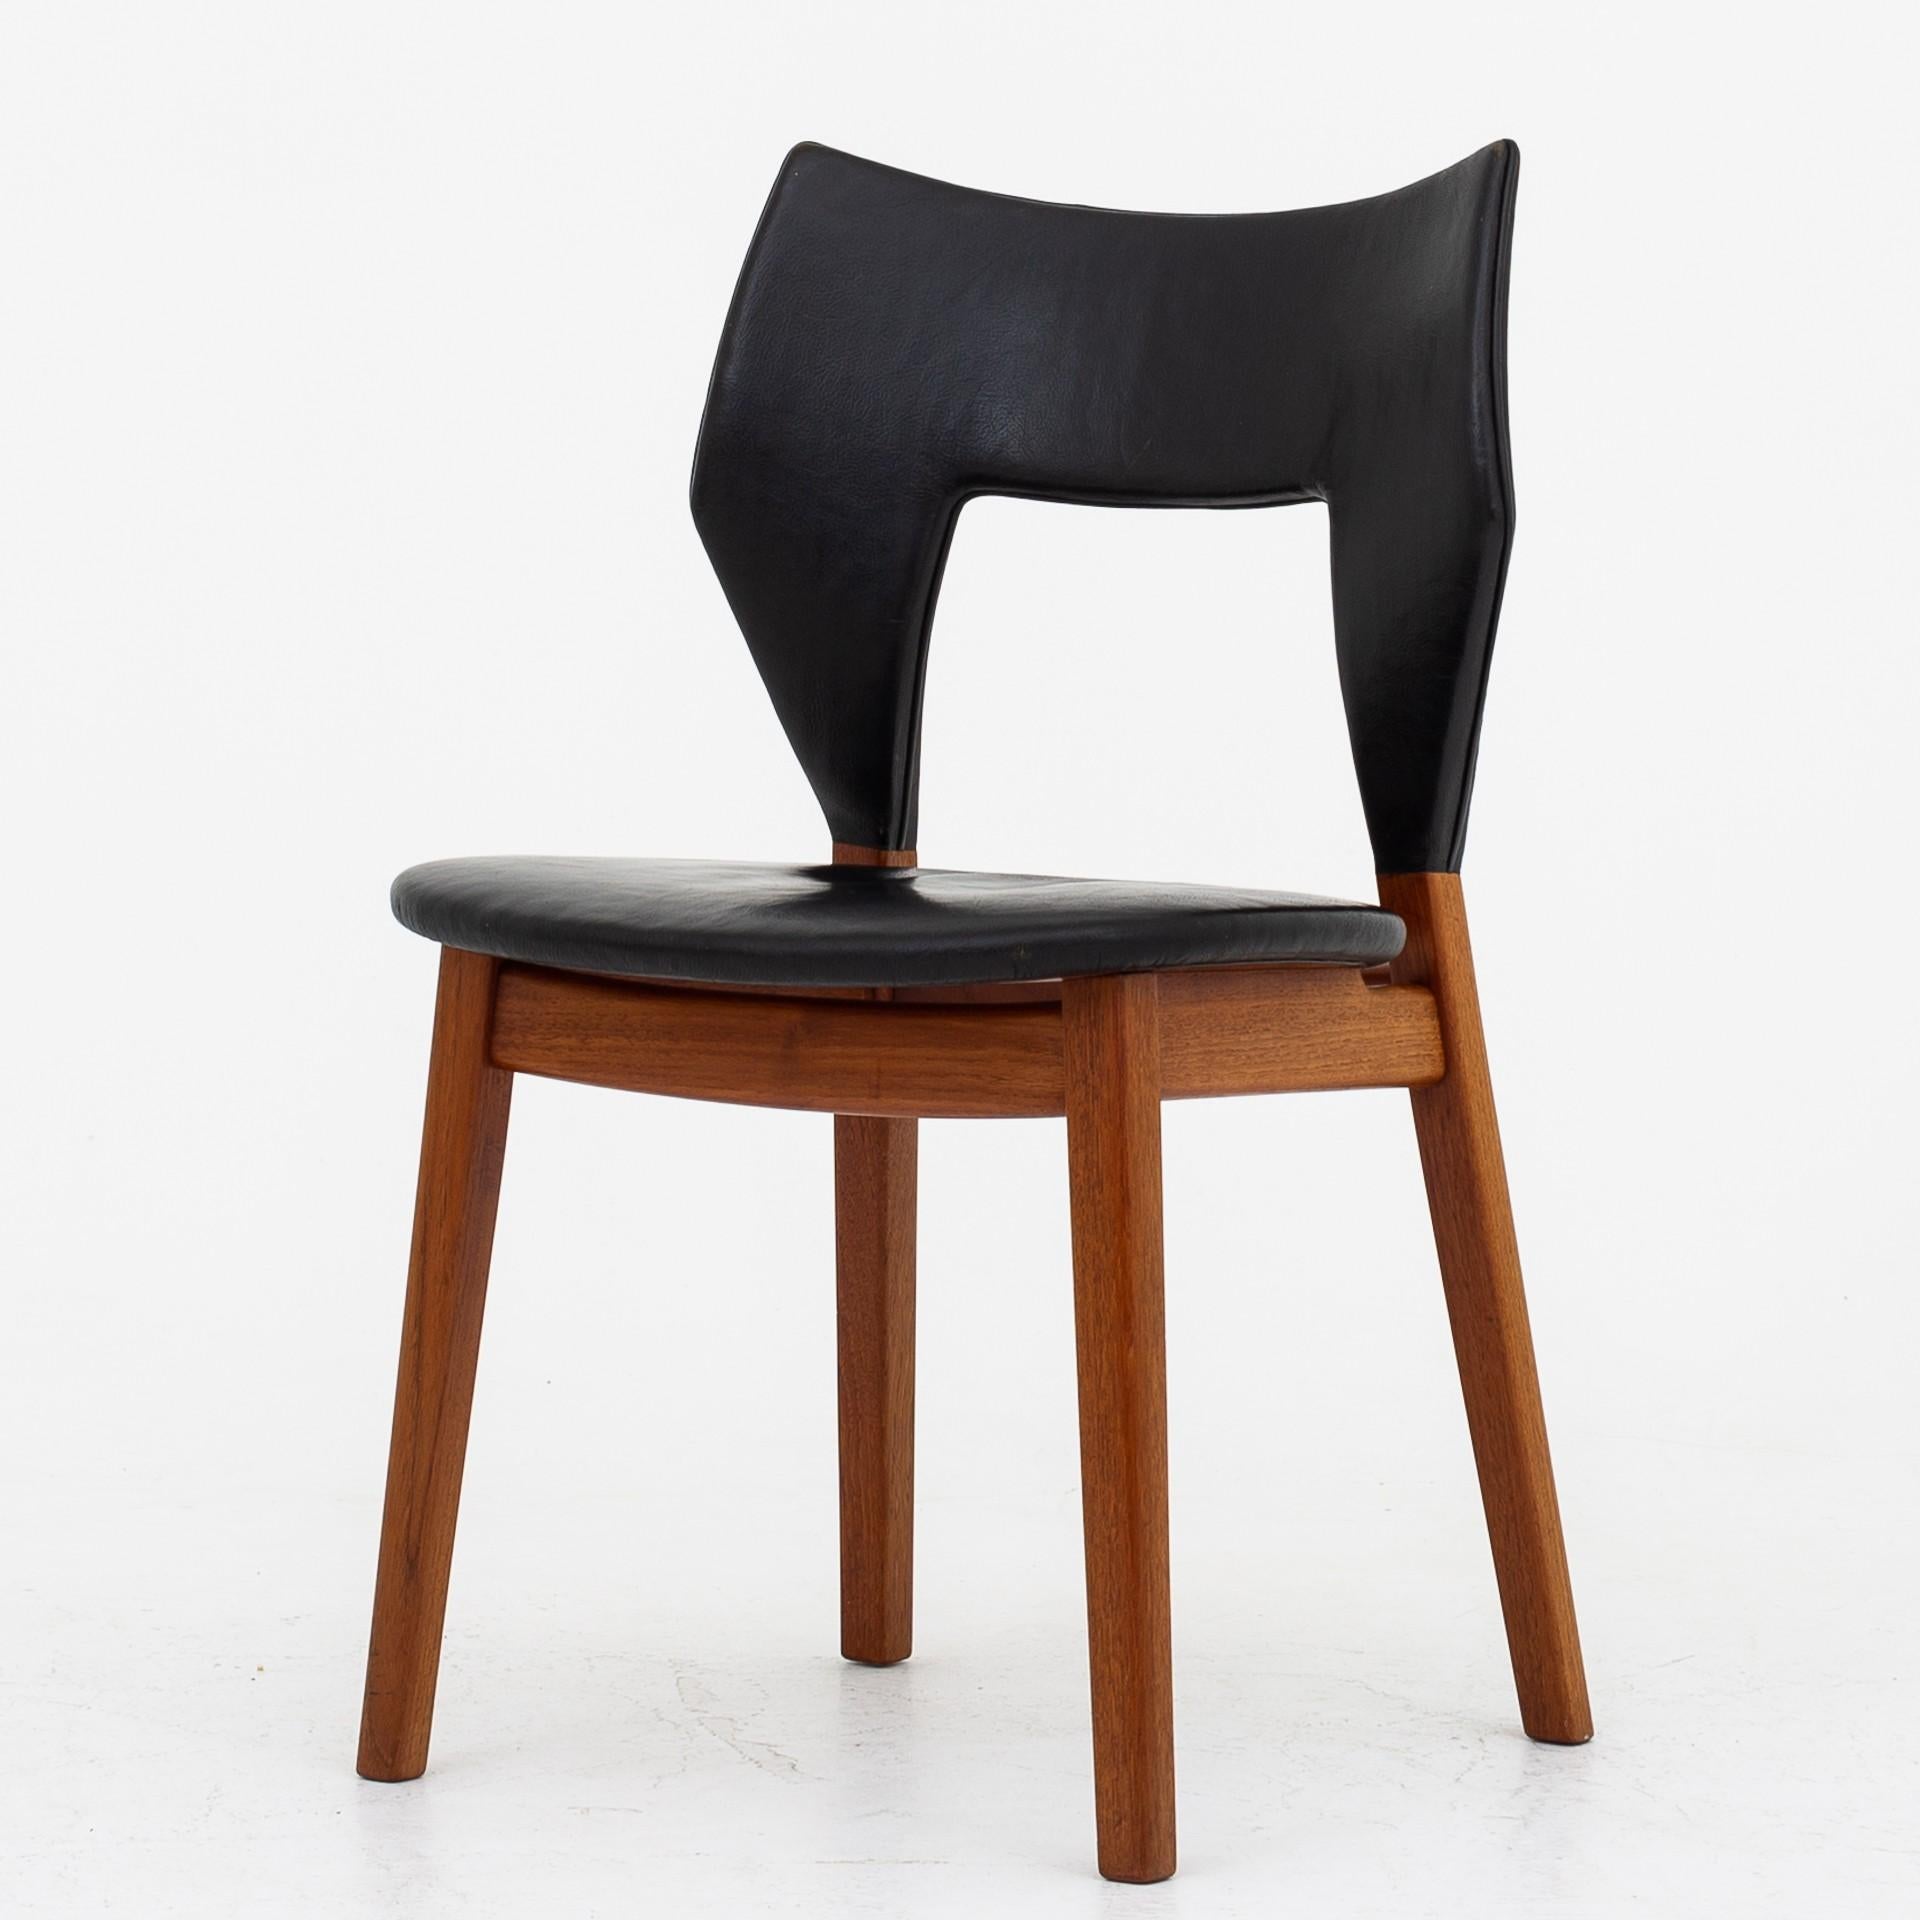 Danish Set of Four Dining Chairs in Teak by Tove & Edvard Kindt Larsen